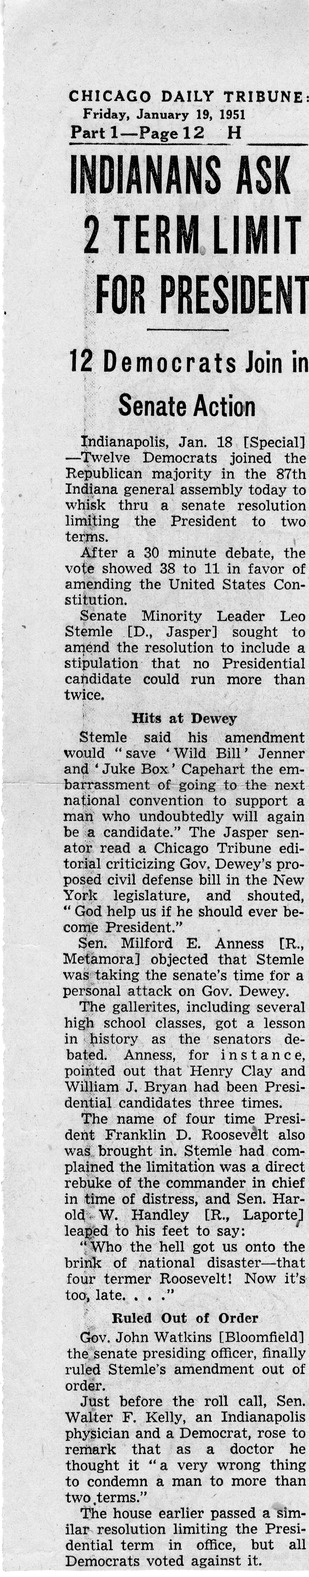 Newspaper Article from the Chicago Daily Tribune, Indianans Ask 2 Term Limit For President